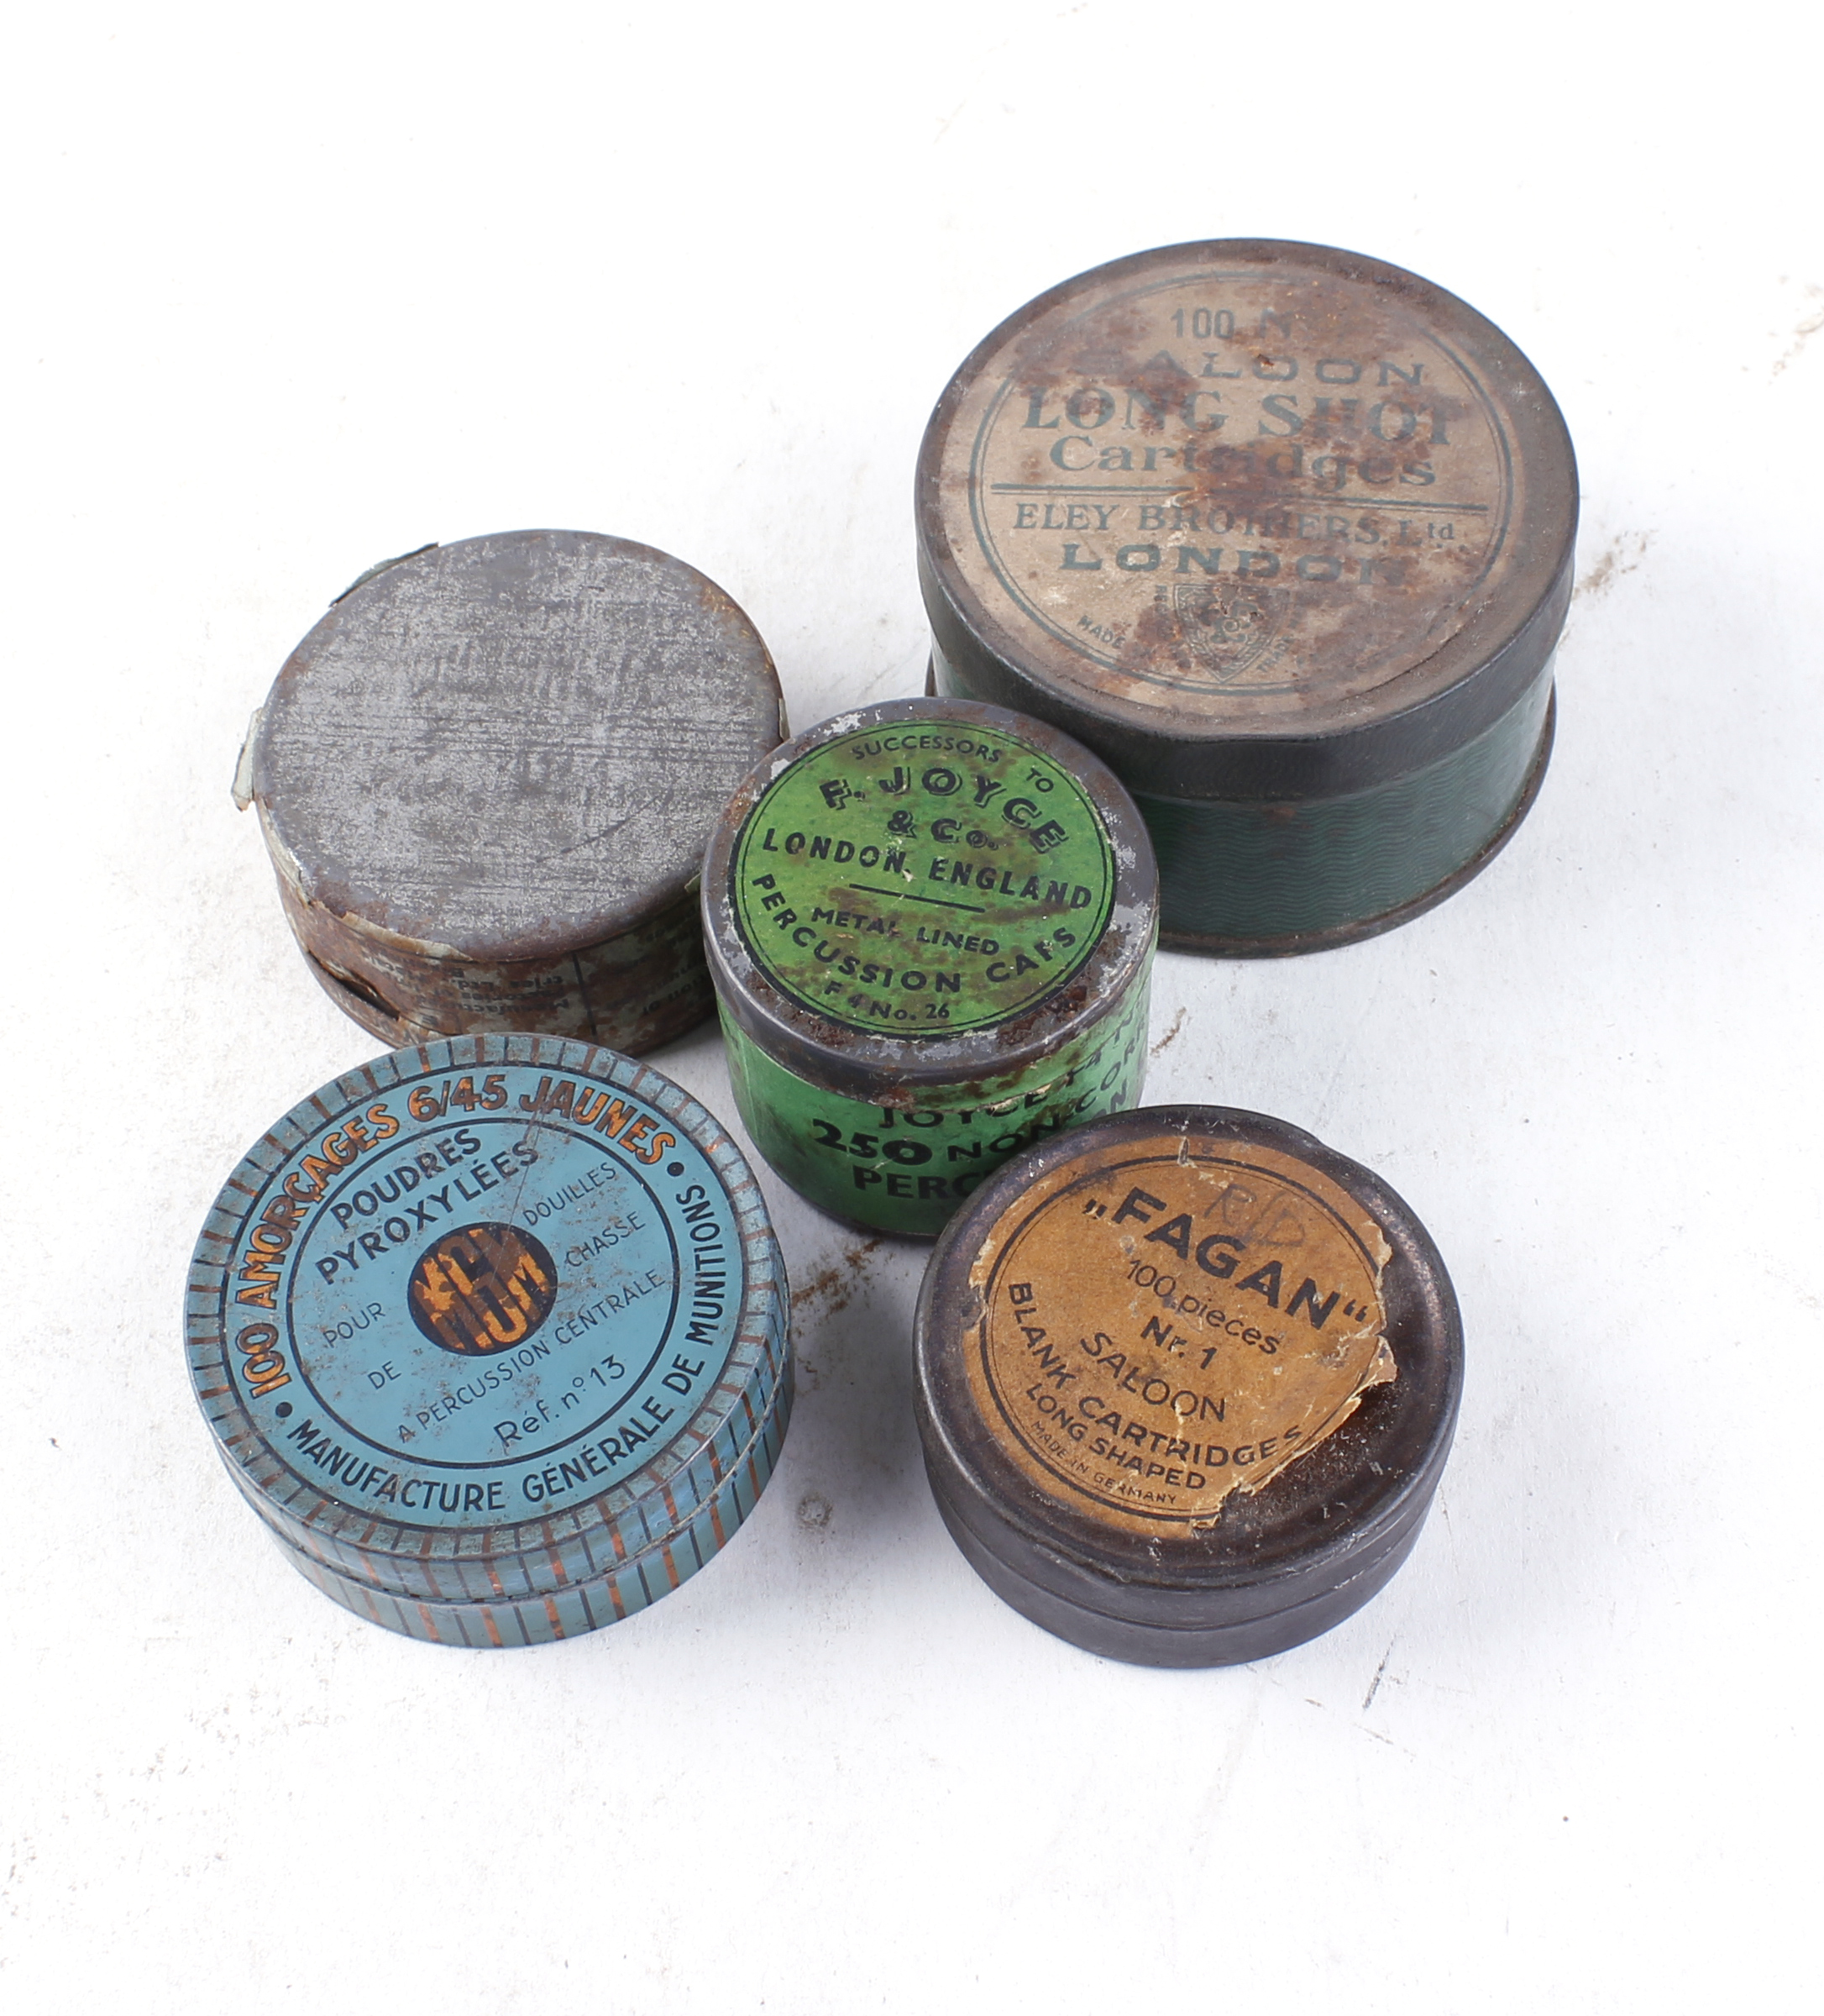 Five tins of percussion caps, blanks and primers - Eley, Joyce, Fagan, etc